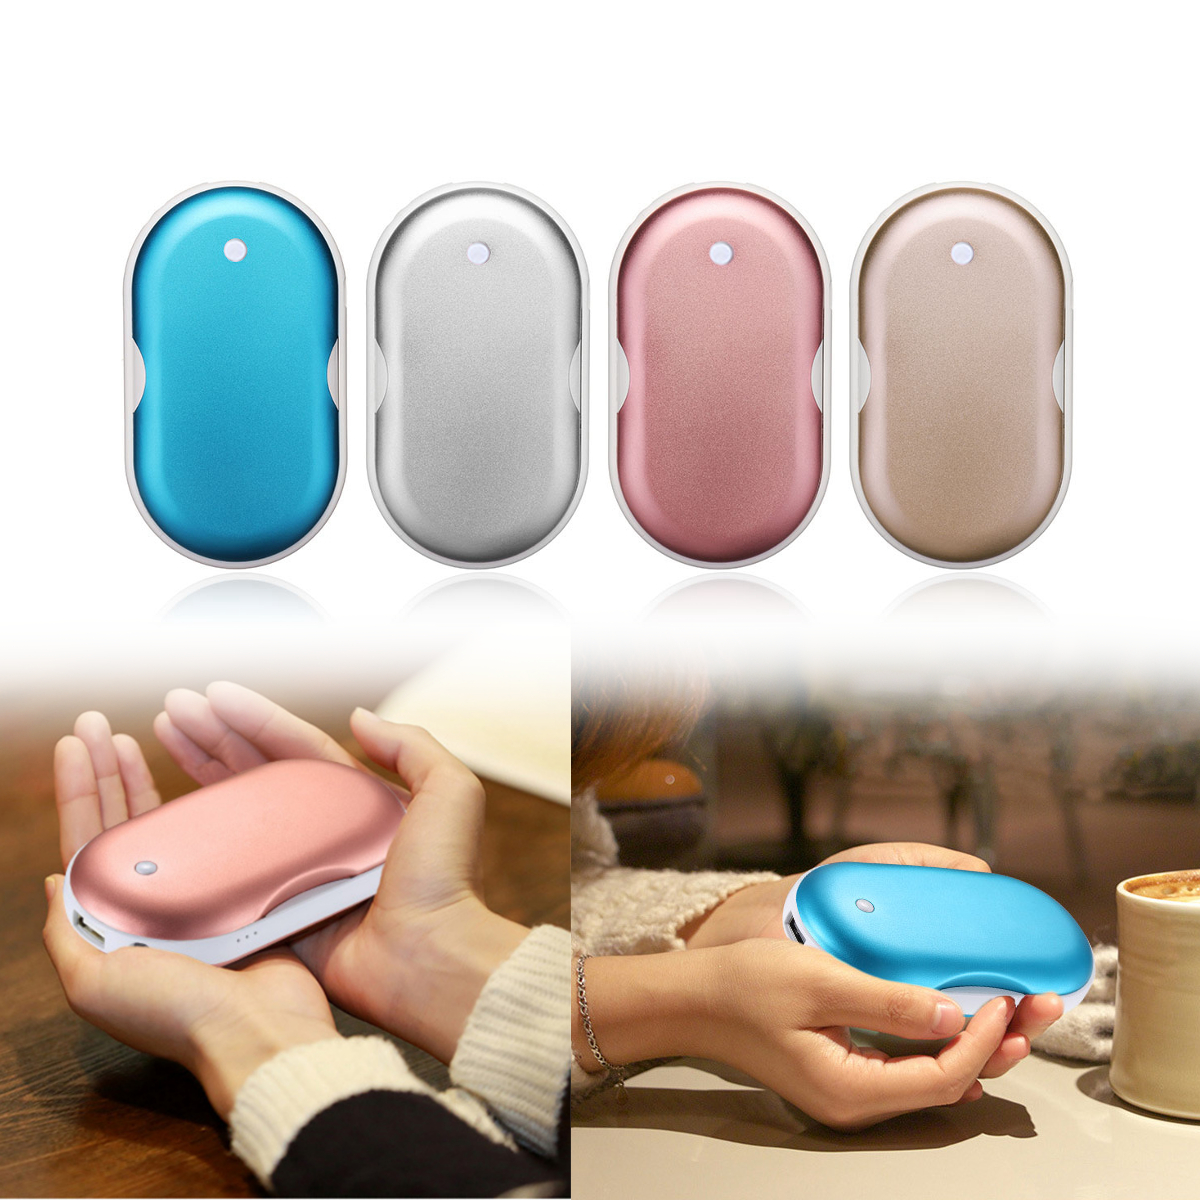 5200mAh-4-In-1-Macarons-Pocket-Hand-Warmer-Heater-Rechargeable-LED-USB-Electric-Mobile-Power-Bank-PT-1413727